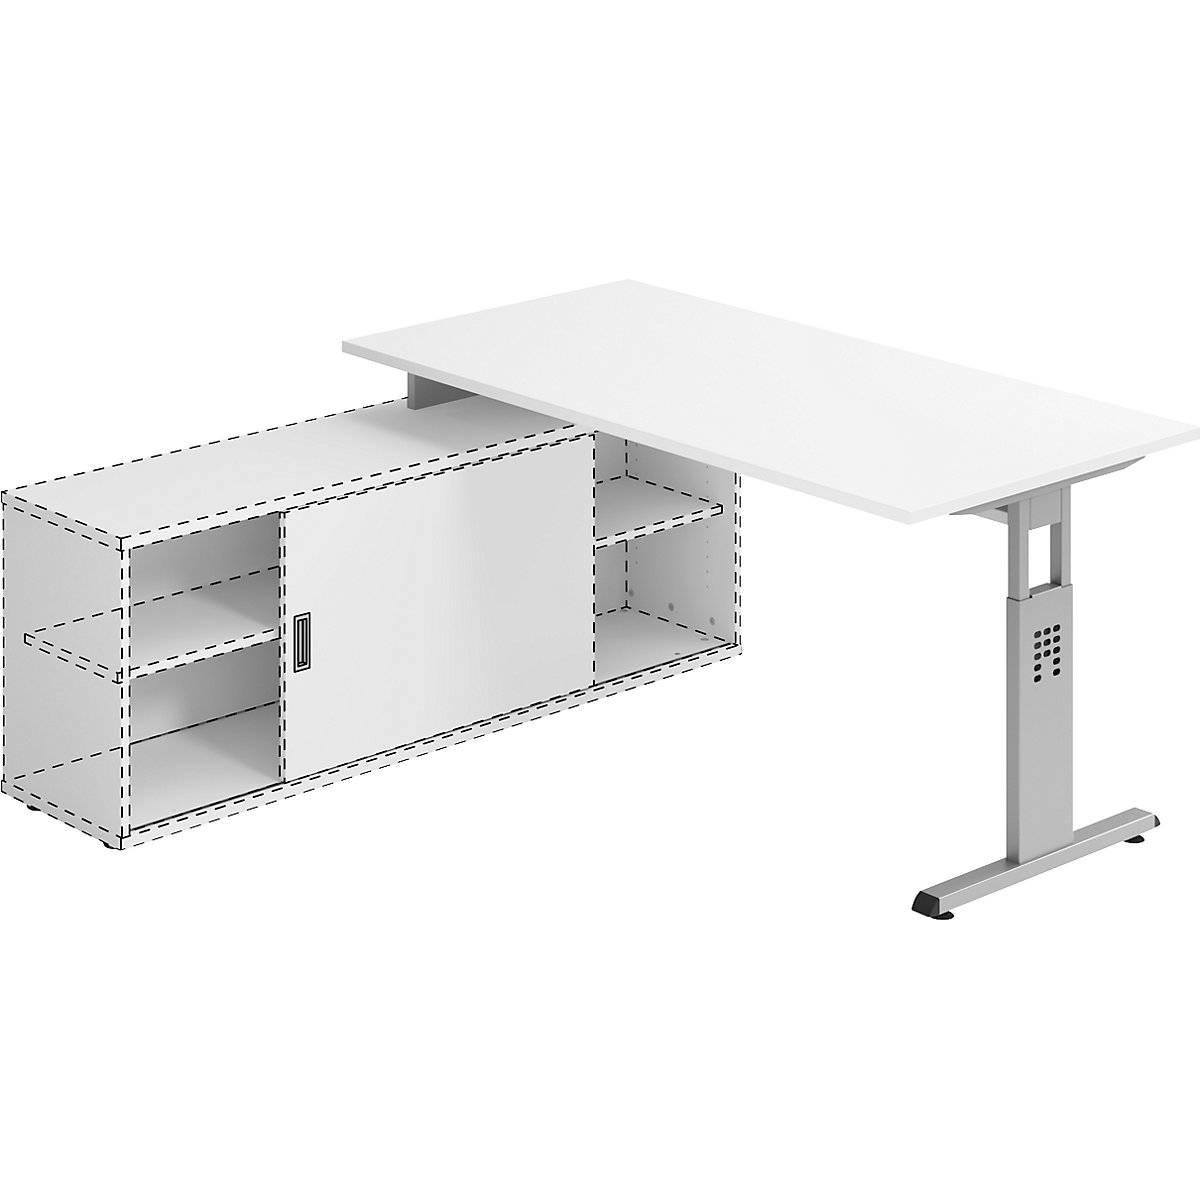 Desk for sideboard FINO, WxD 1600 x 800 mm, white-5